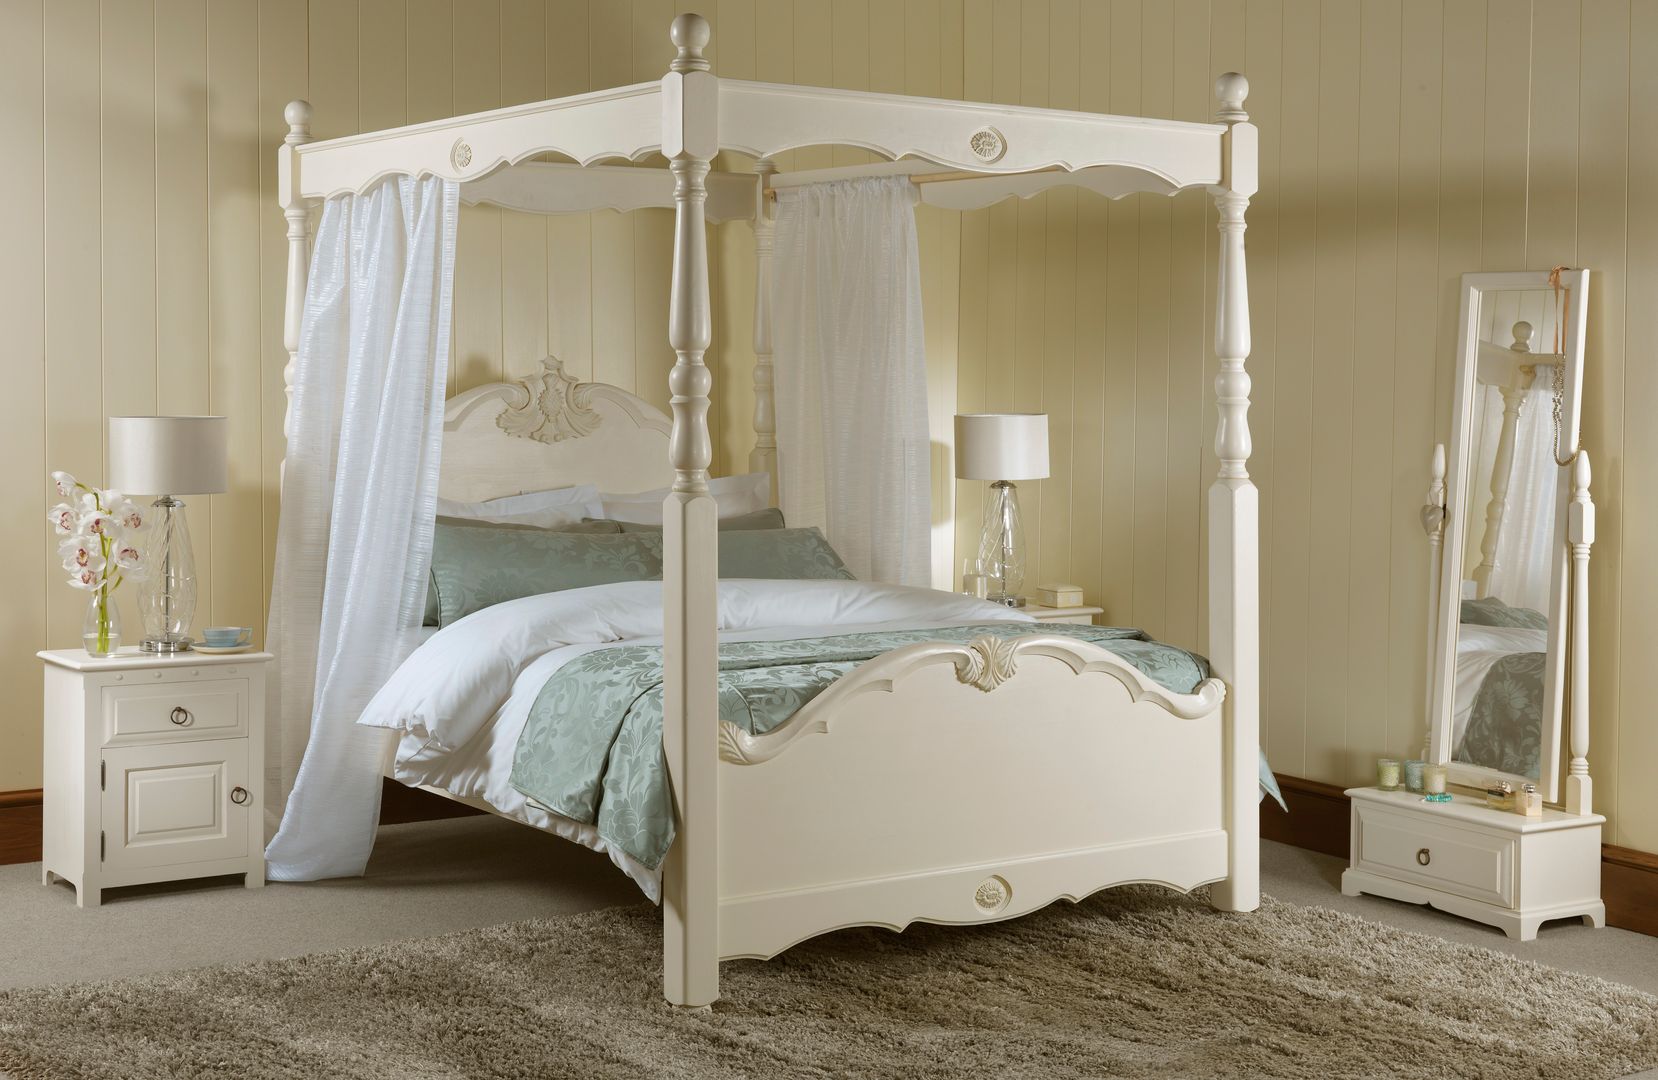 The Orleans Four Poster Bed Revival Beds Classic style bedroom Beds & headboards